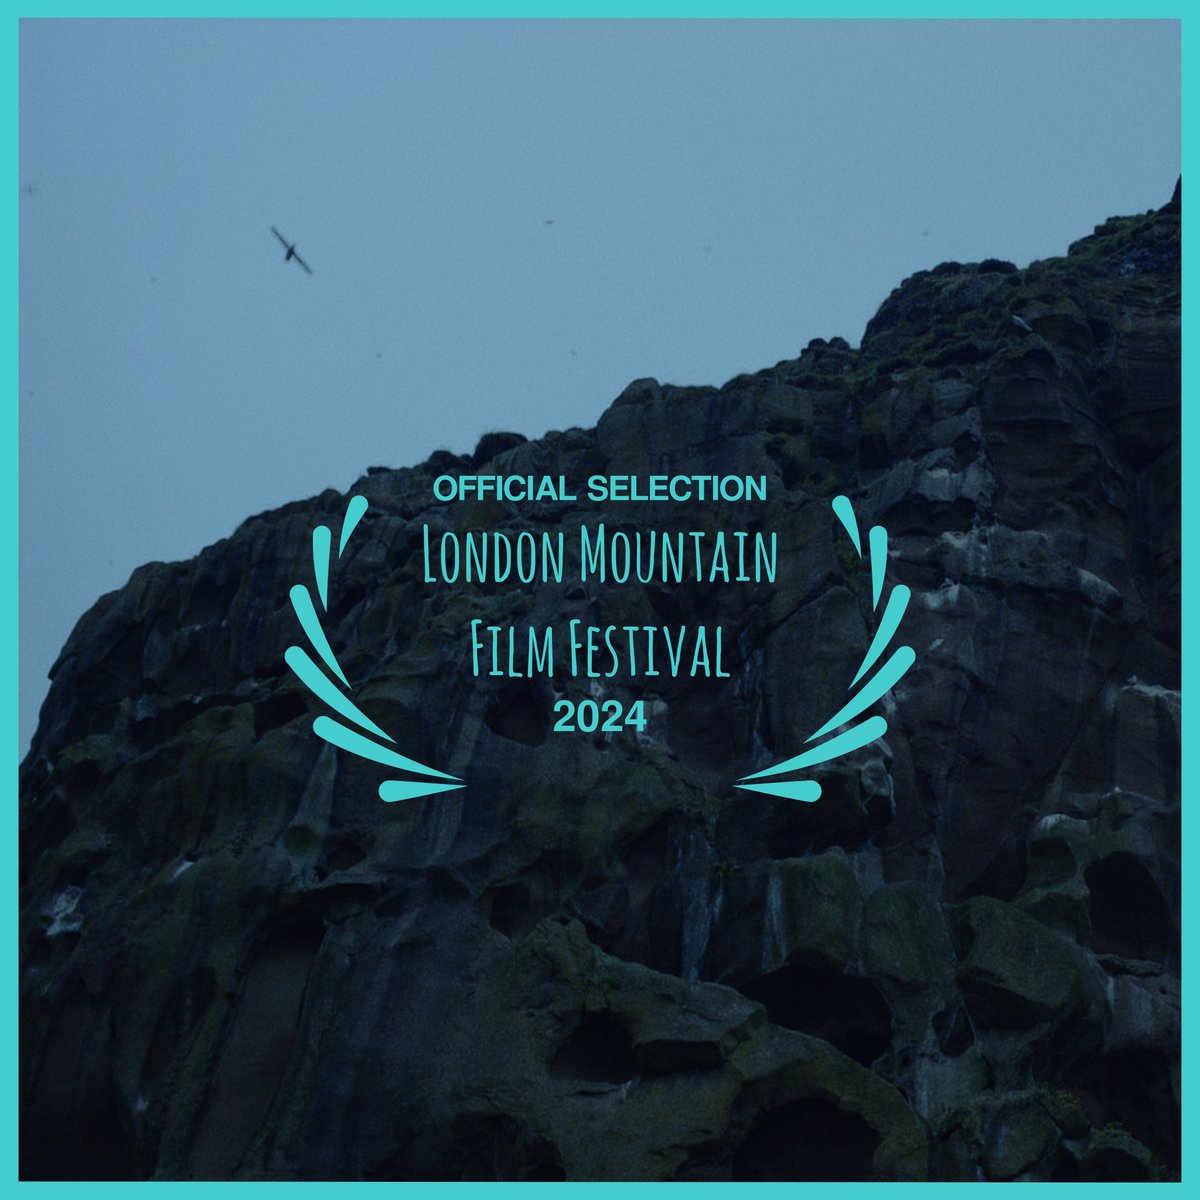 Puffling has come back home to London! Catch us at the Garden Cinema on Saturday 24th as part of the London Mountain Film Festival. @londonmountain1